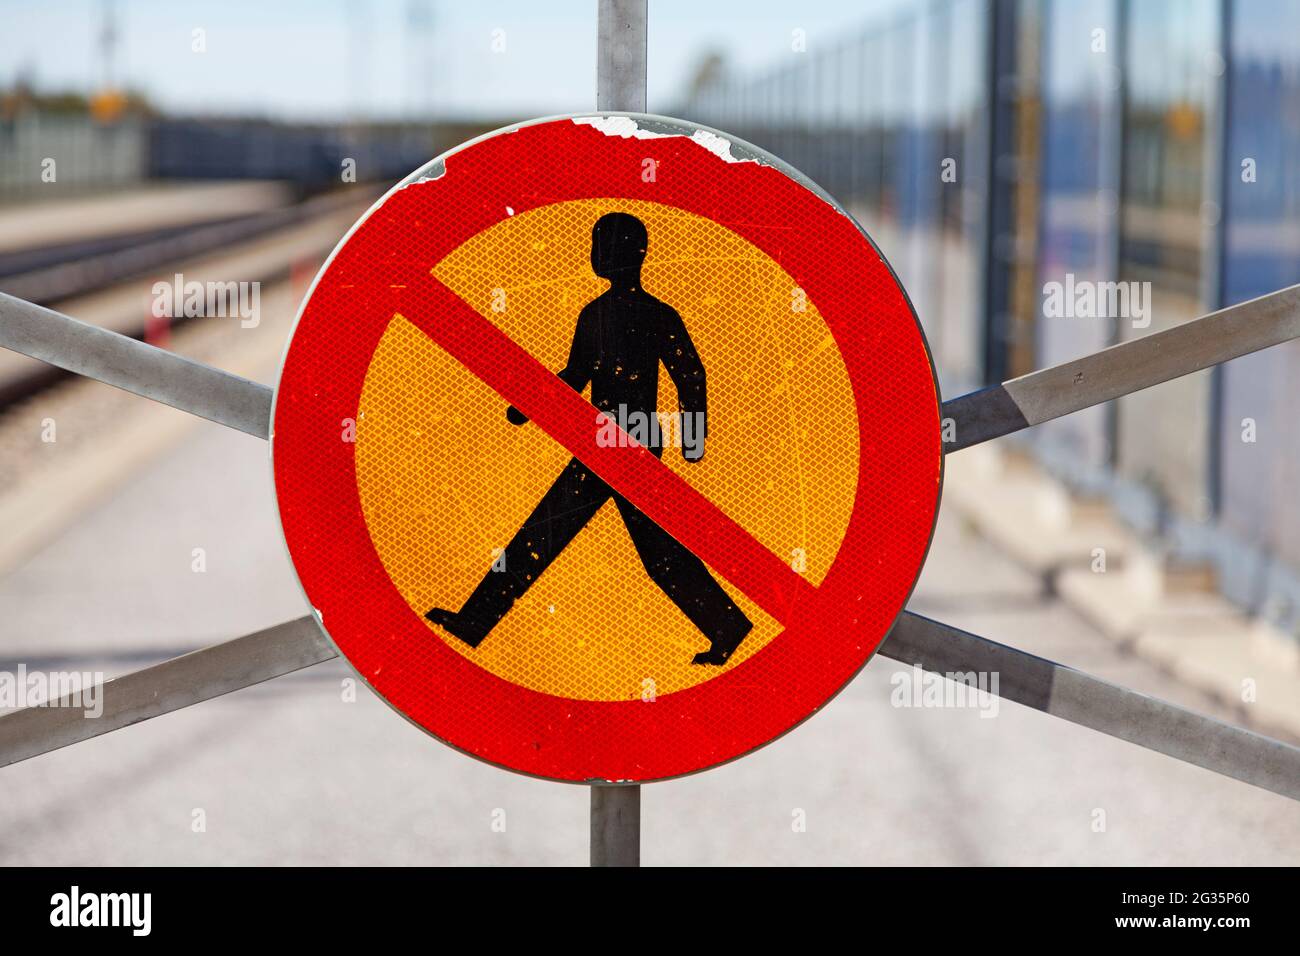 https://c8.alamy.com/comp/2G35P60/worn-road-sign-which-means-it-is-forbidden-to-go-here-2G35P60.jpg